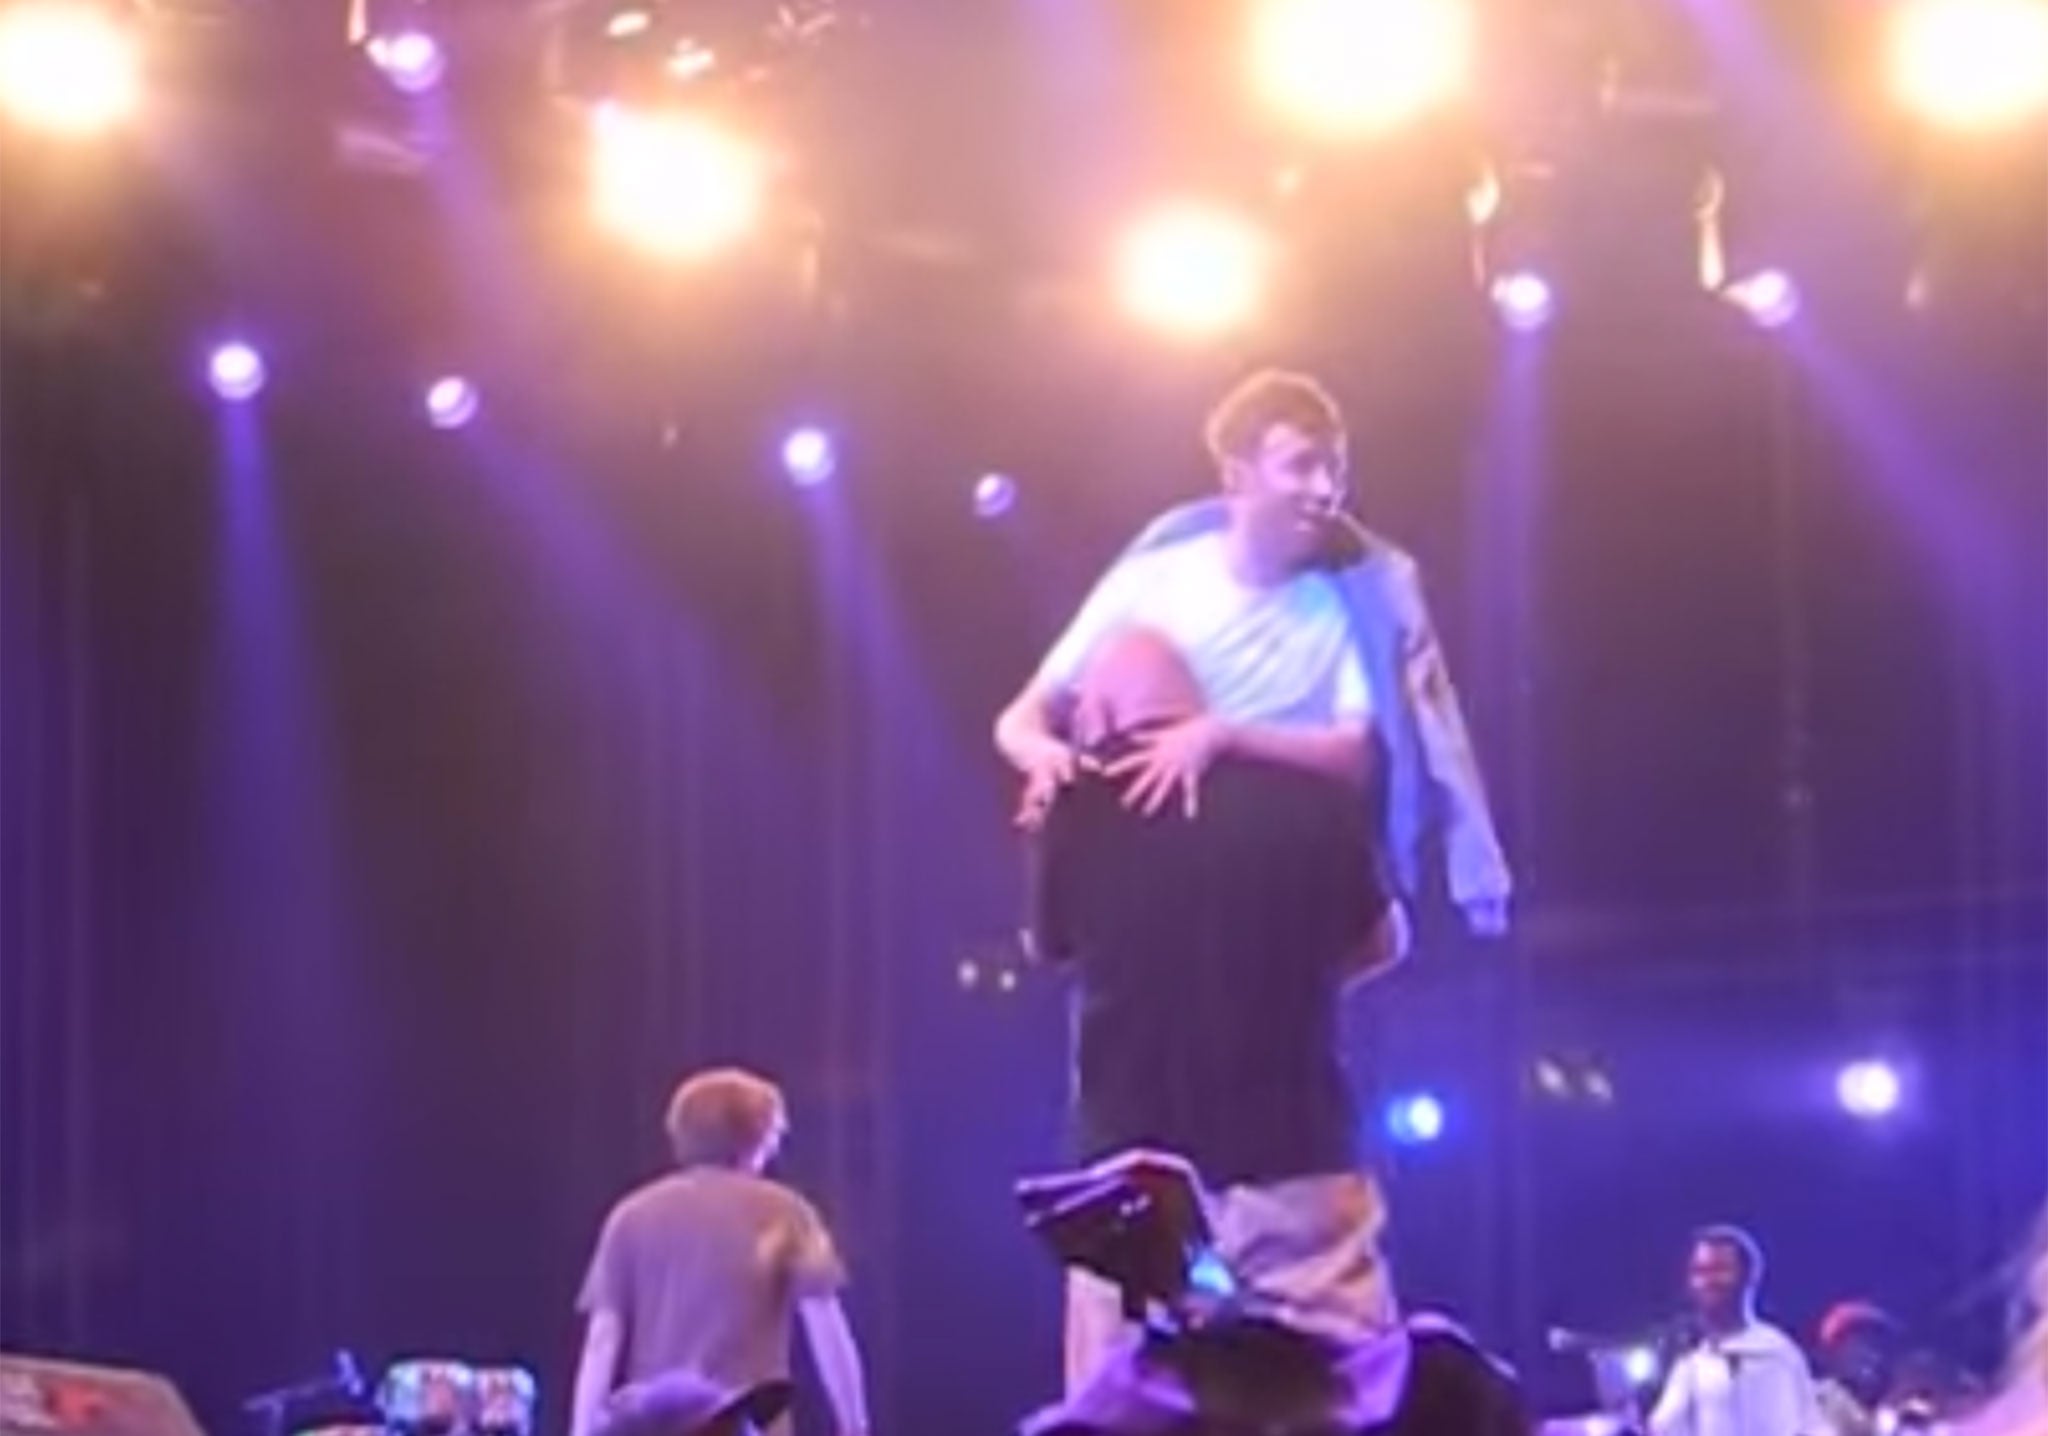 Damon Albarn being carried off stage by security at Roskilde Festival 2015